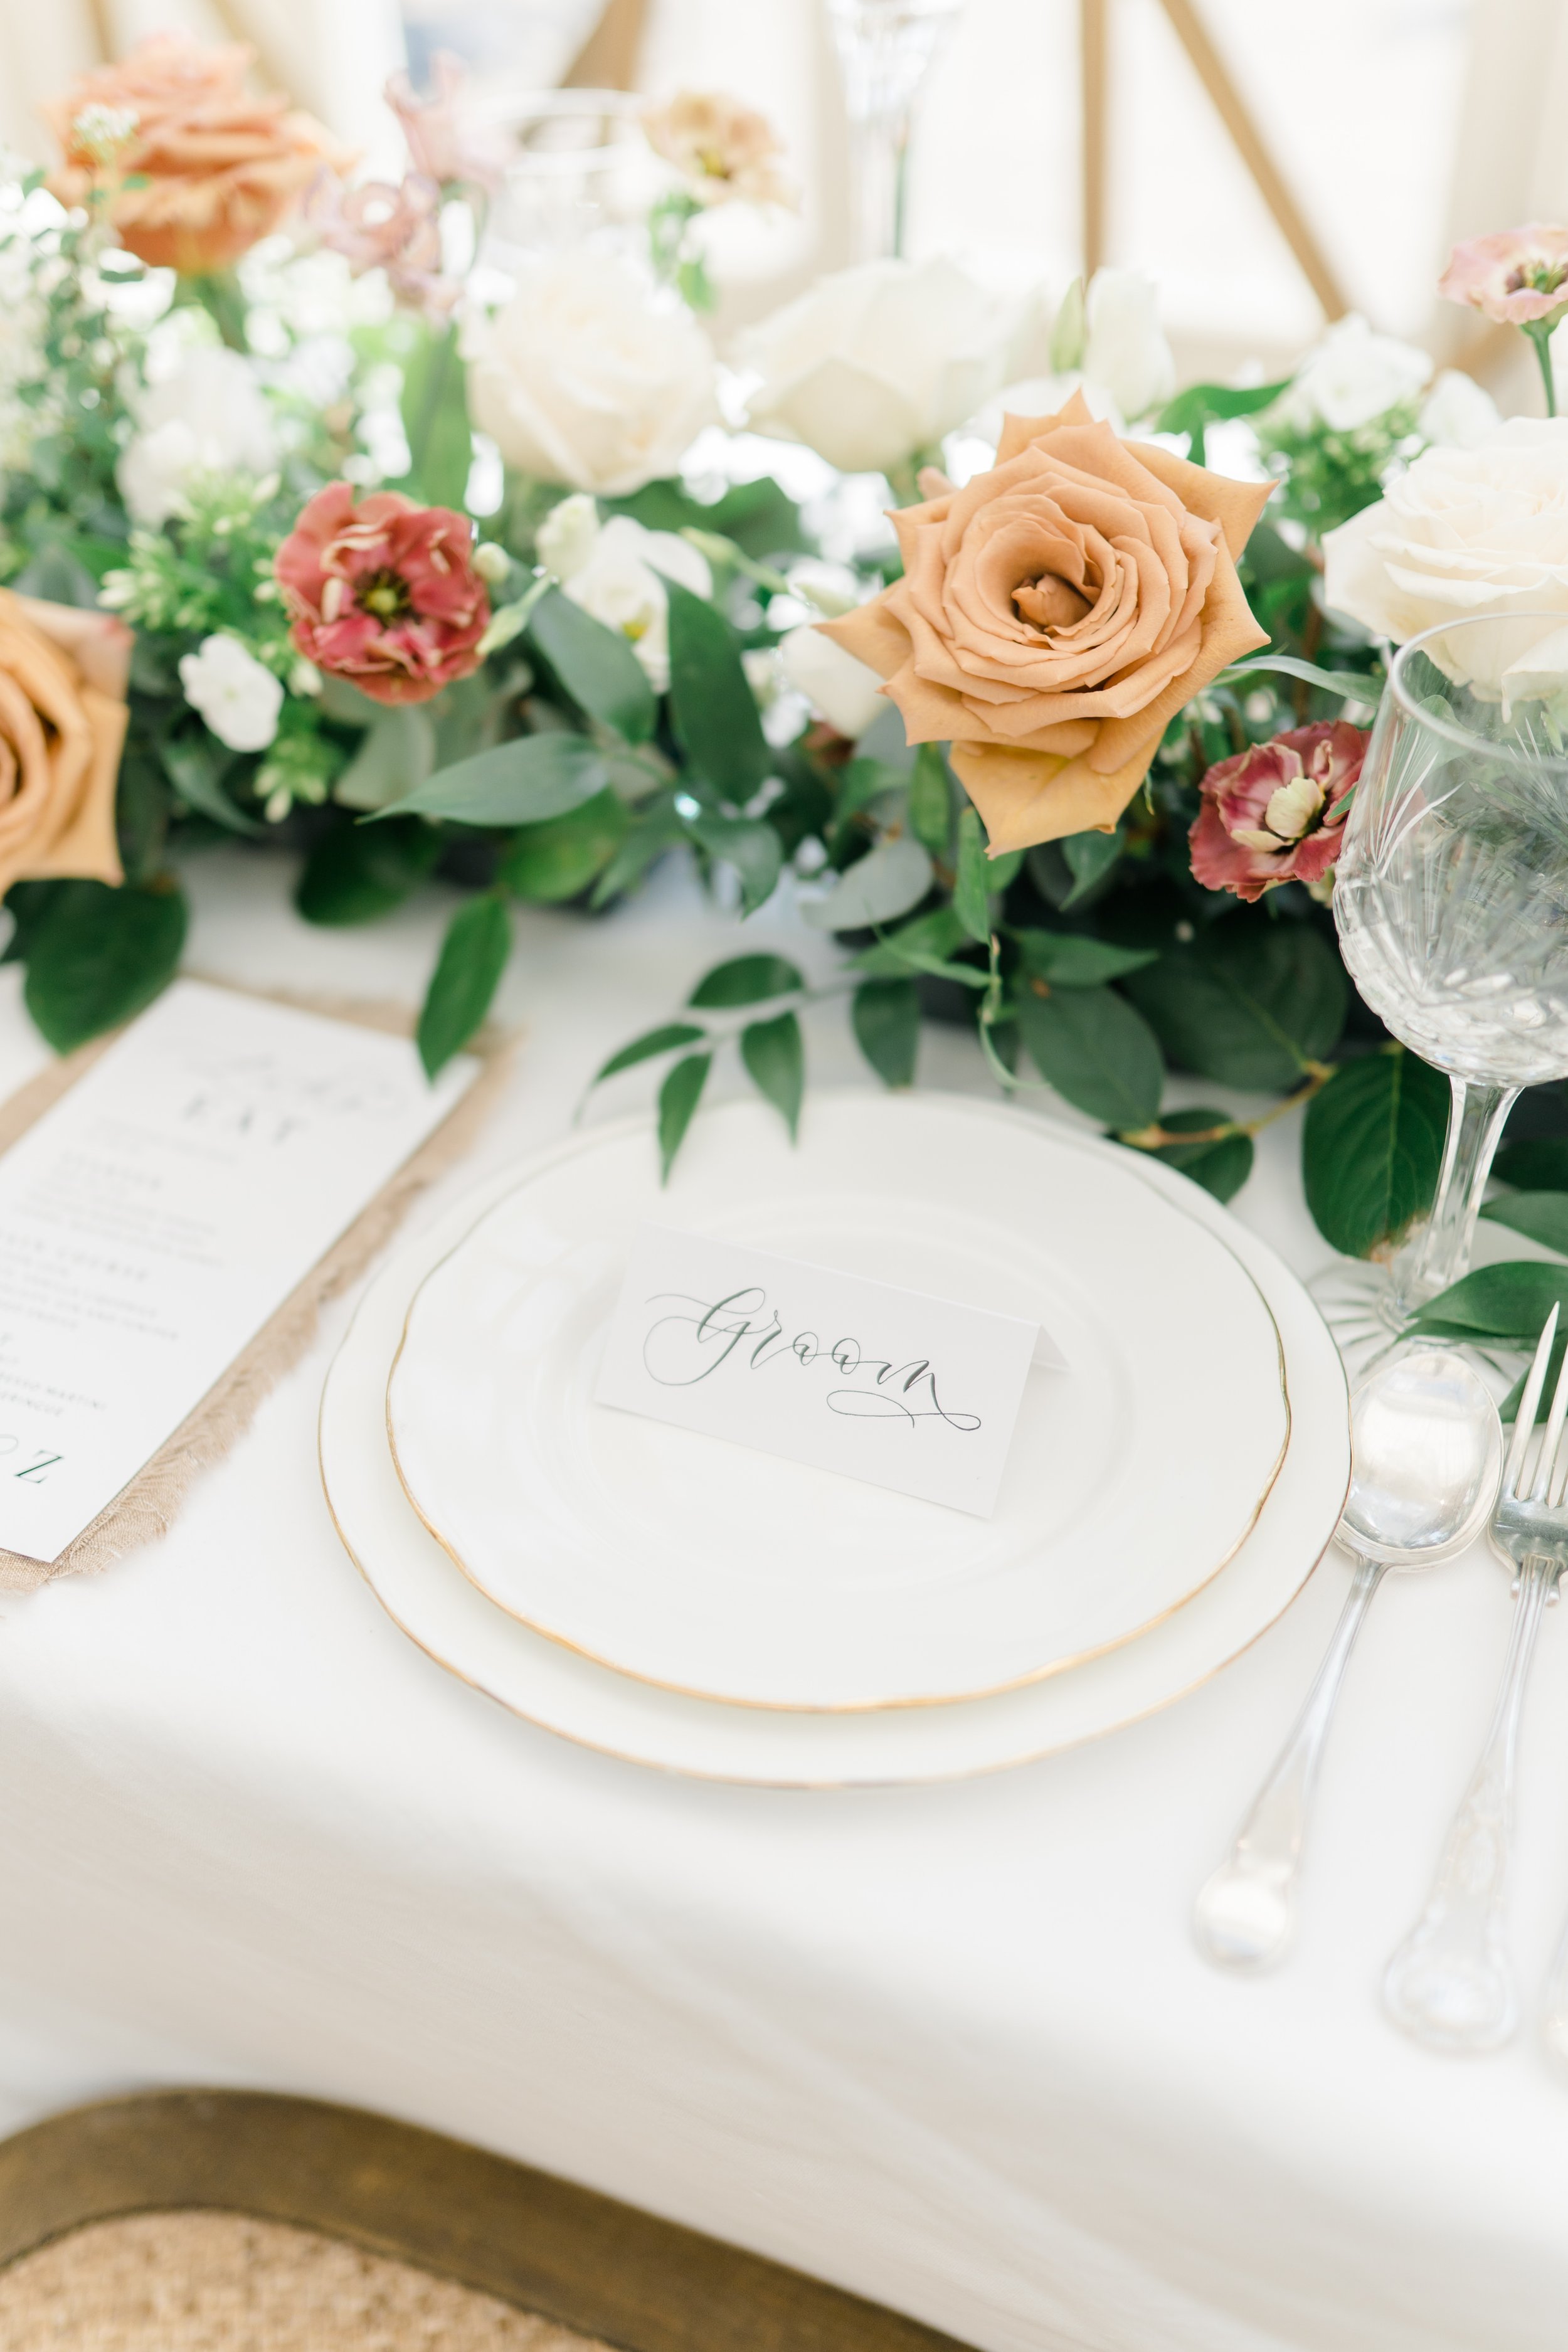 Monochrome wedding inspiration - hand-lettered calligraphy place cards - calligraphy name cards